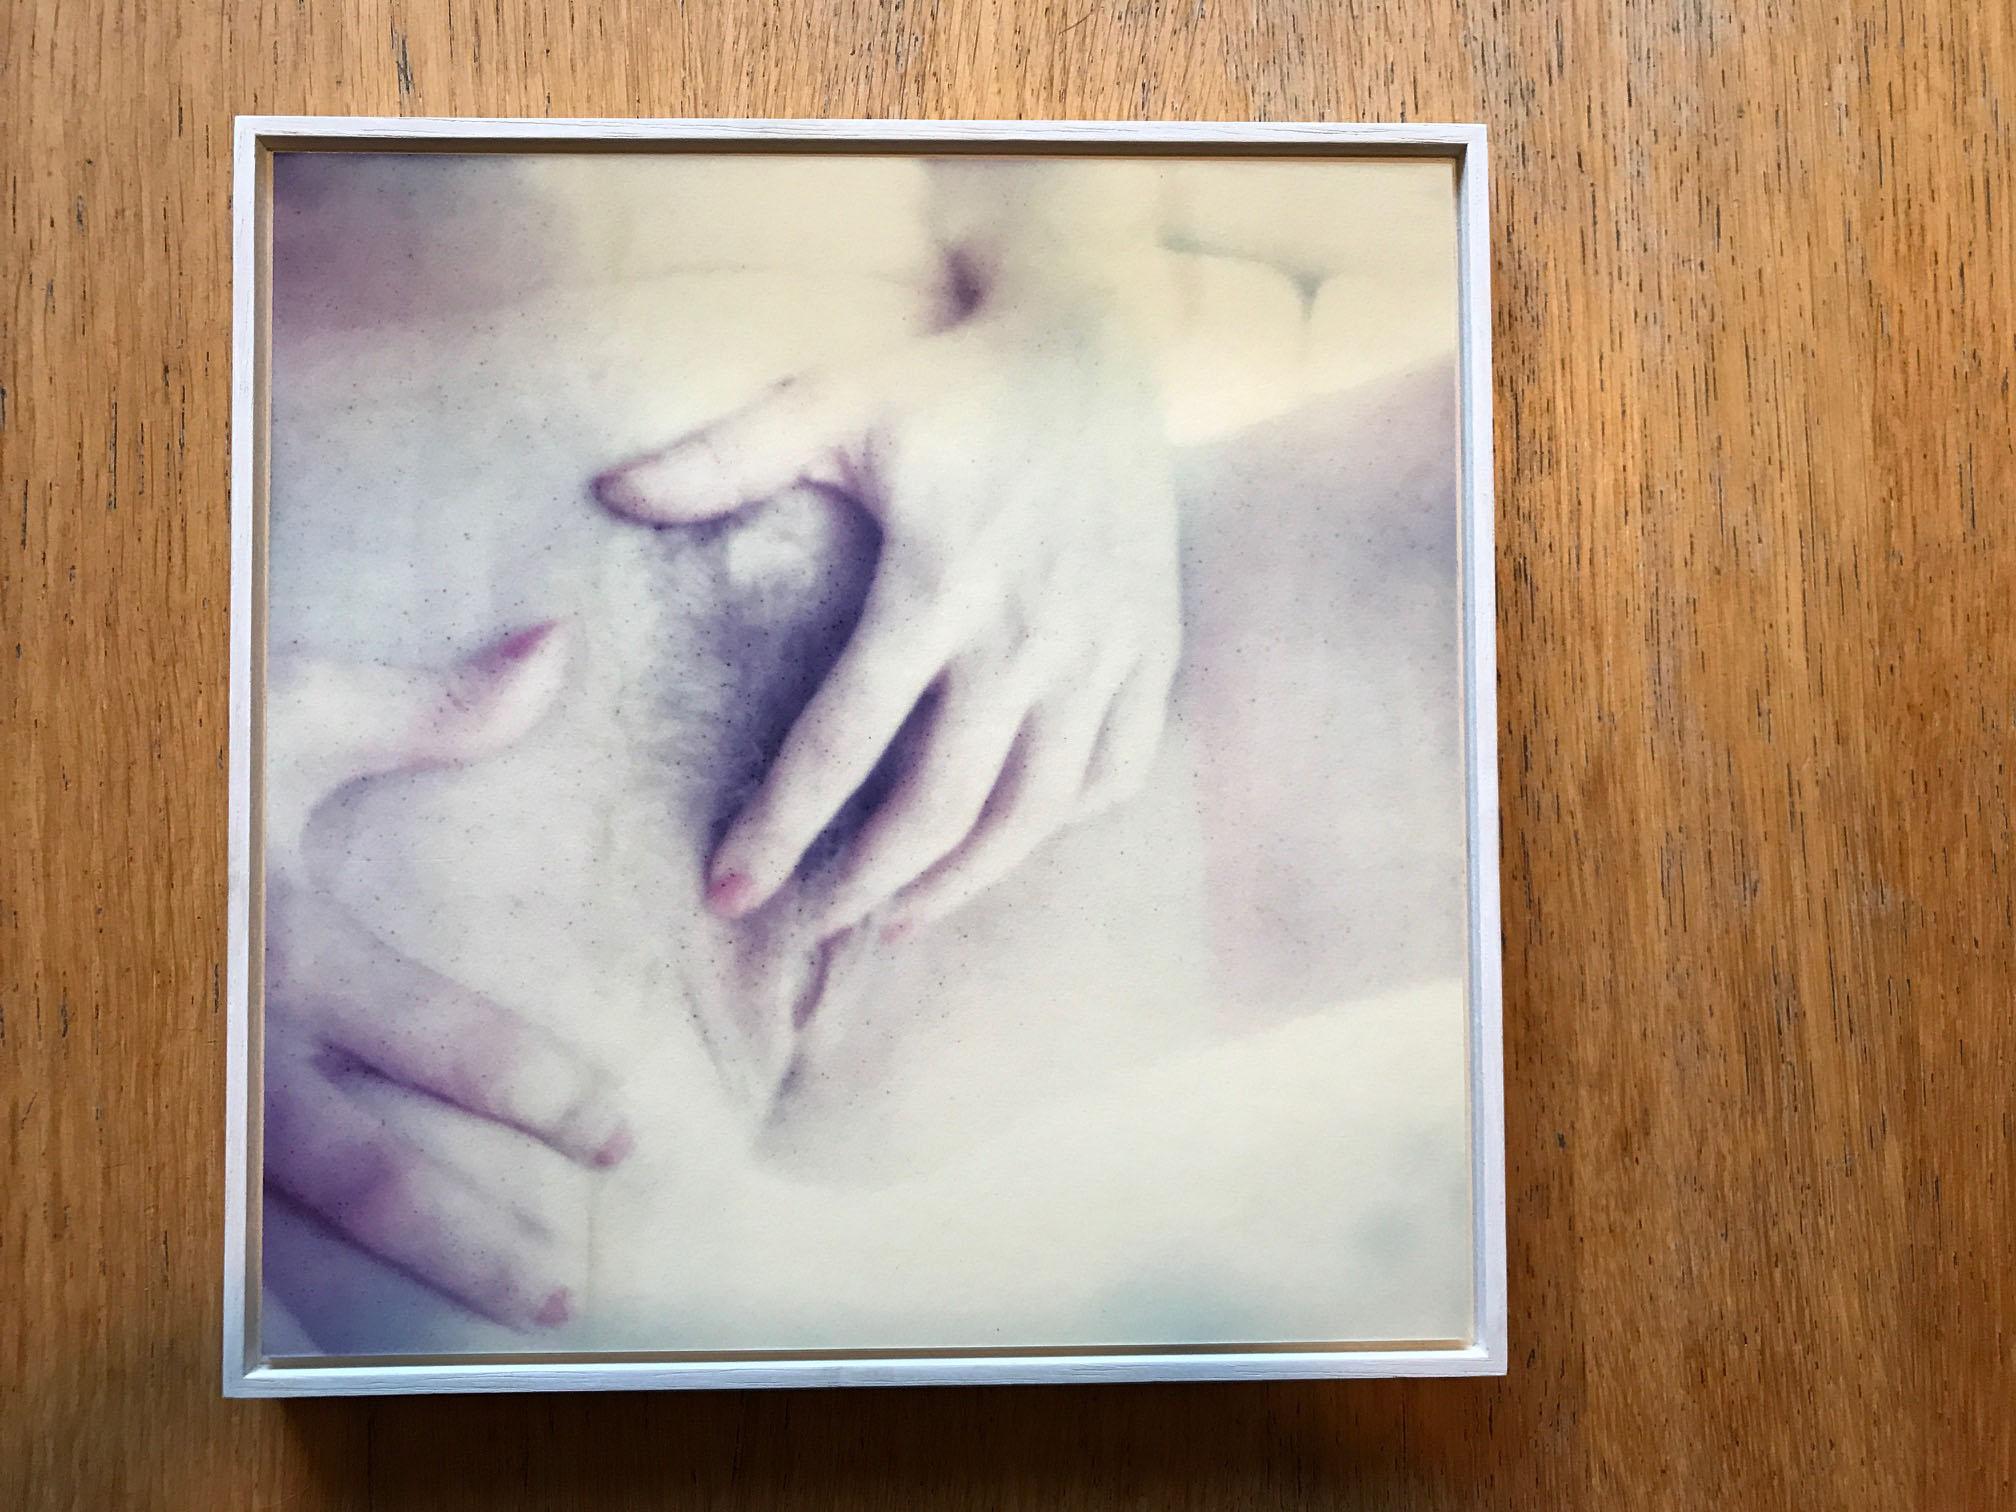 Letters from Madame - Touch - from the series mme.xposed  - Photograph by Carmen de Vos